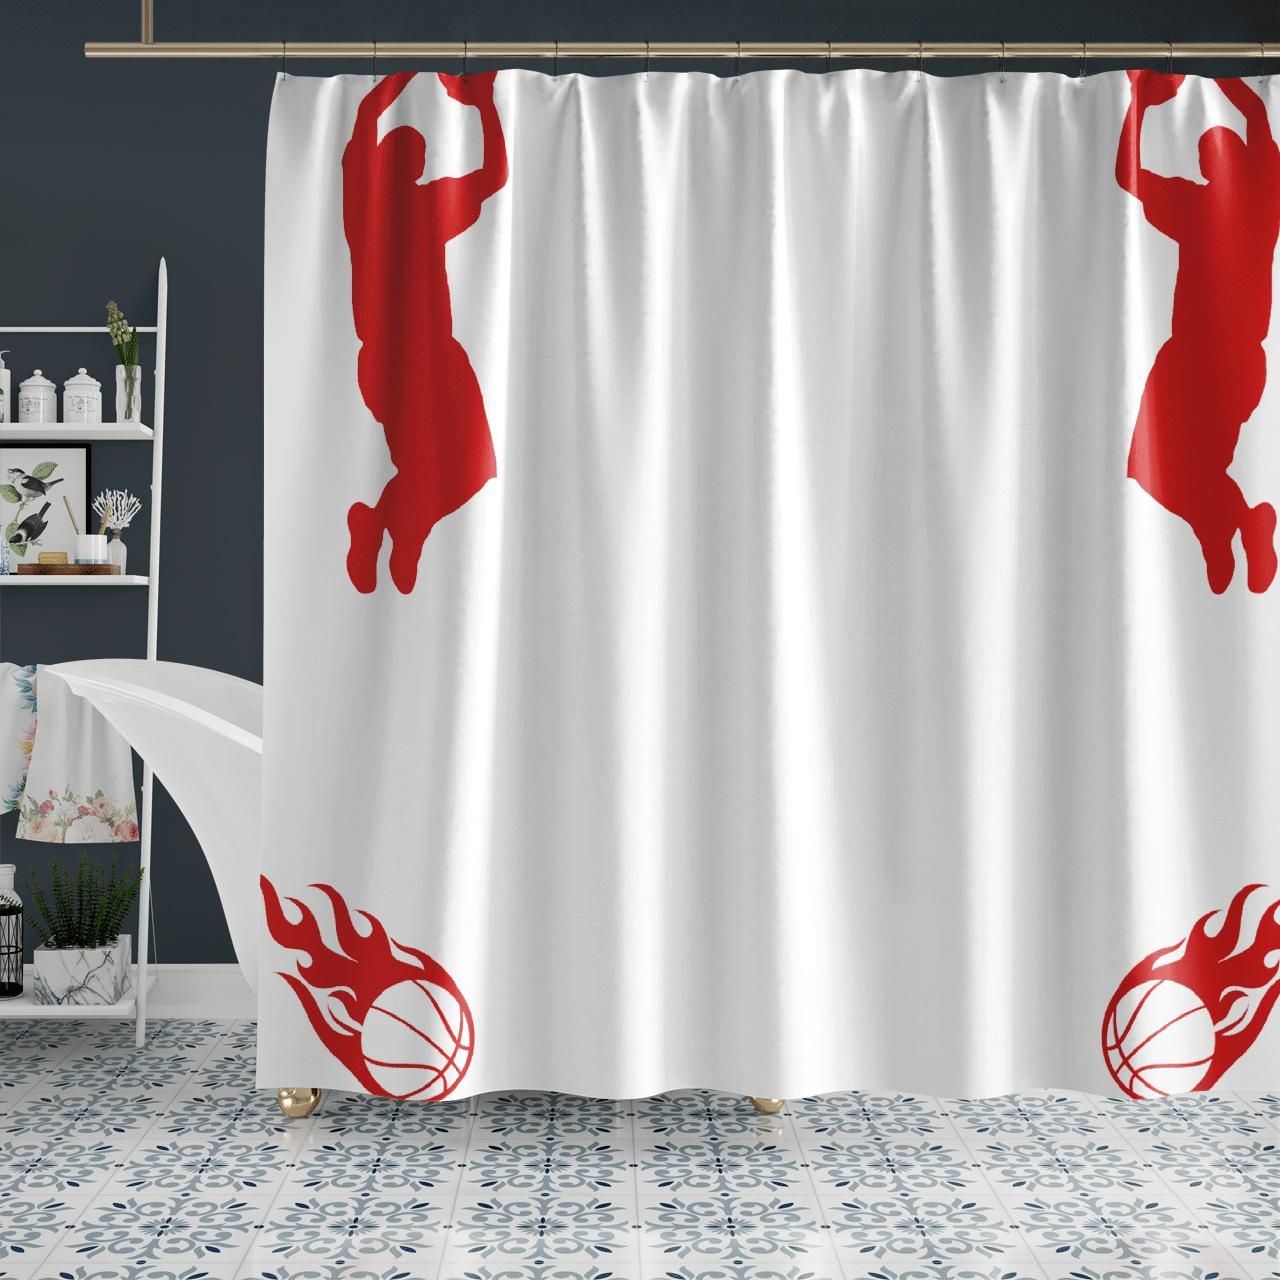 40S Isnt Usually This Sexy Shower Curtain